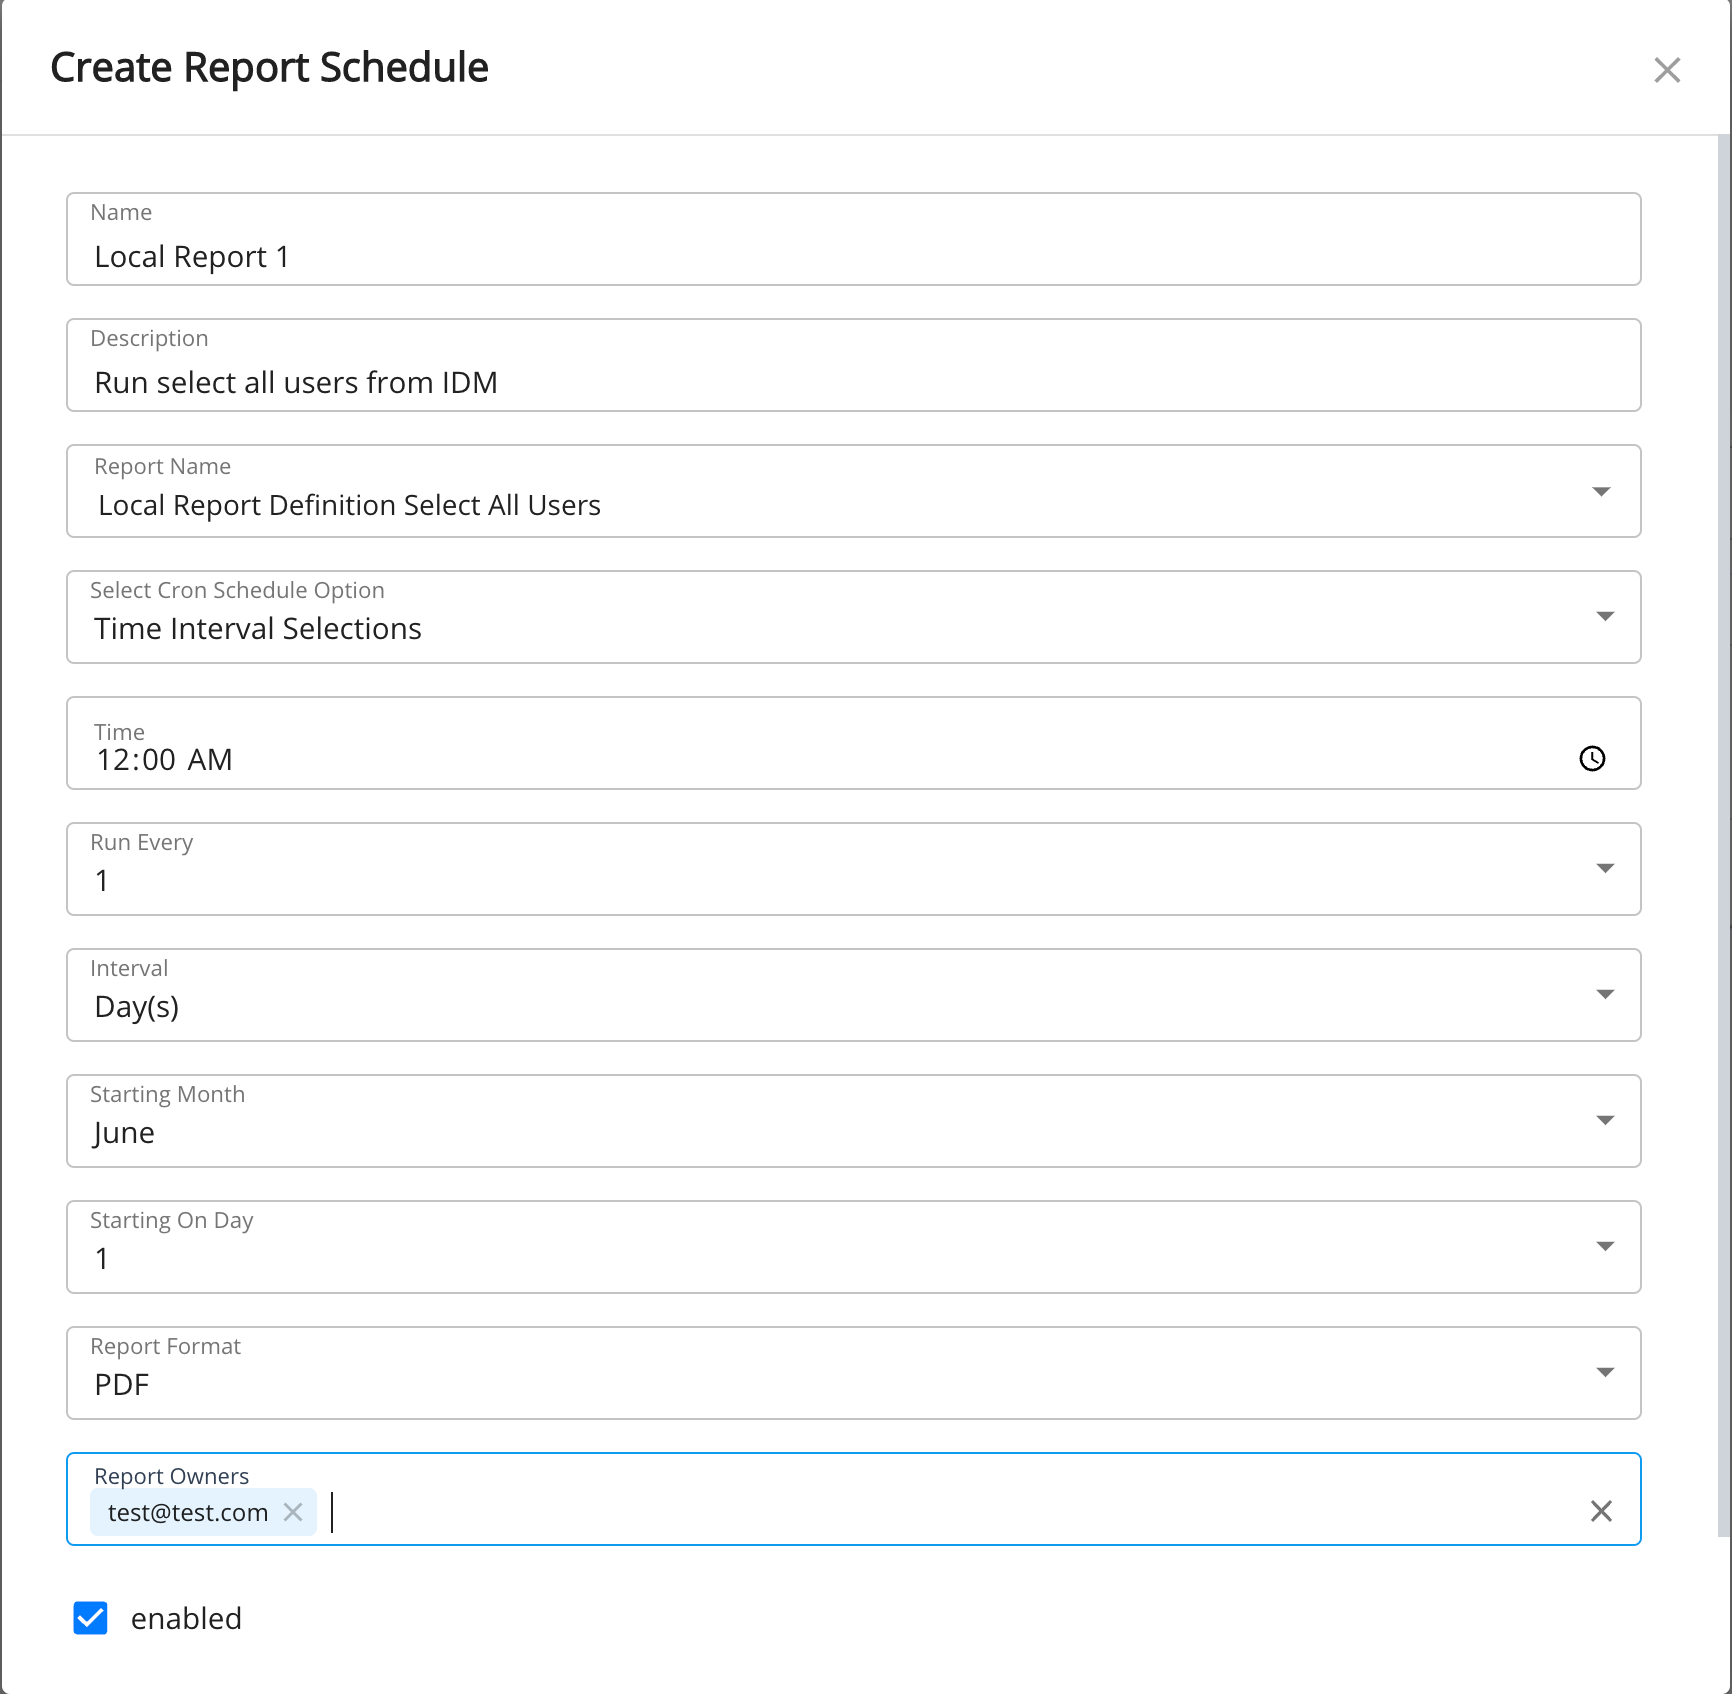 Create report schedule with time interval selection